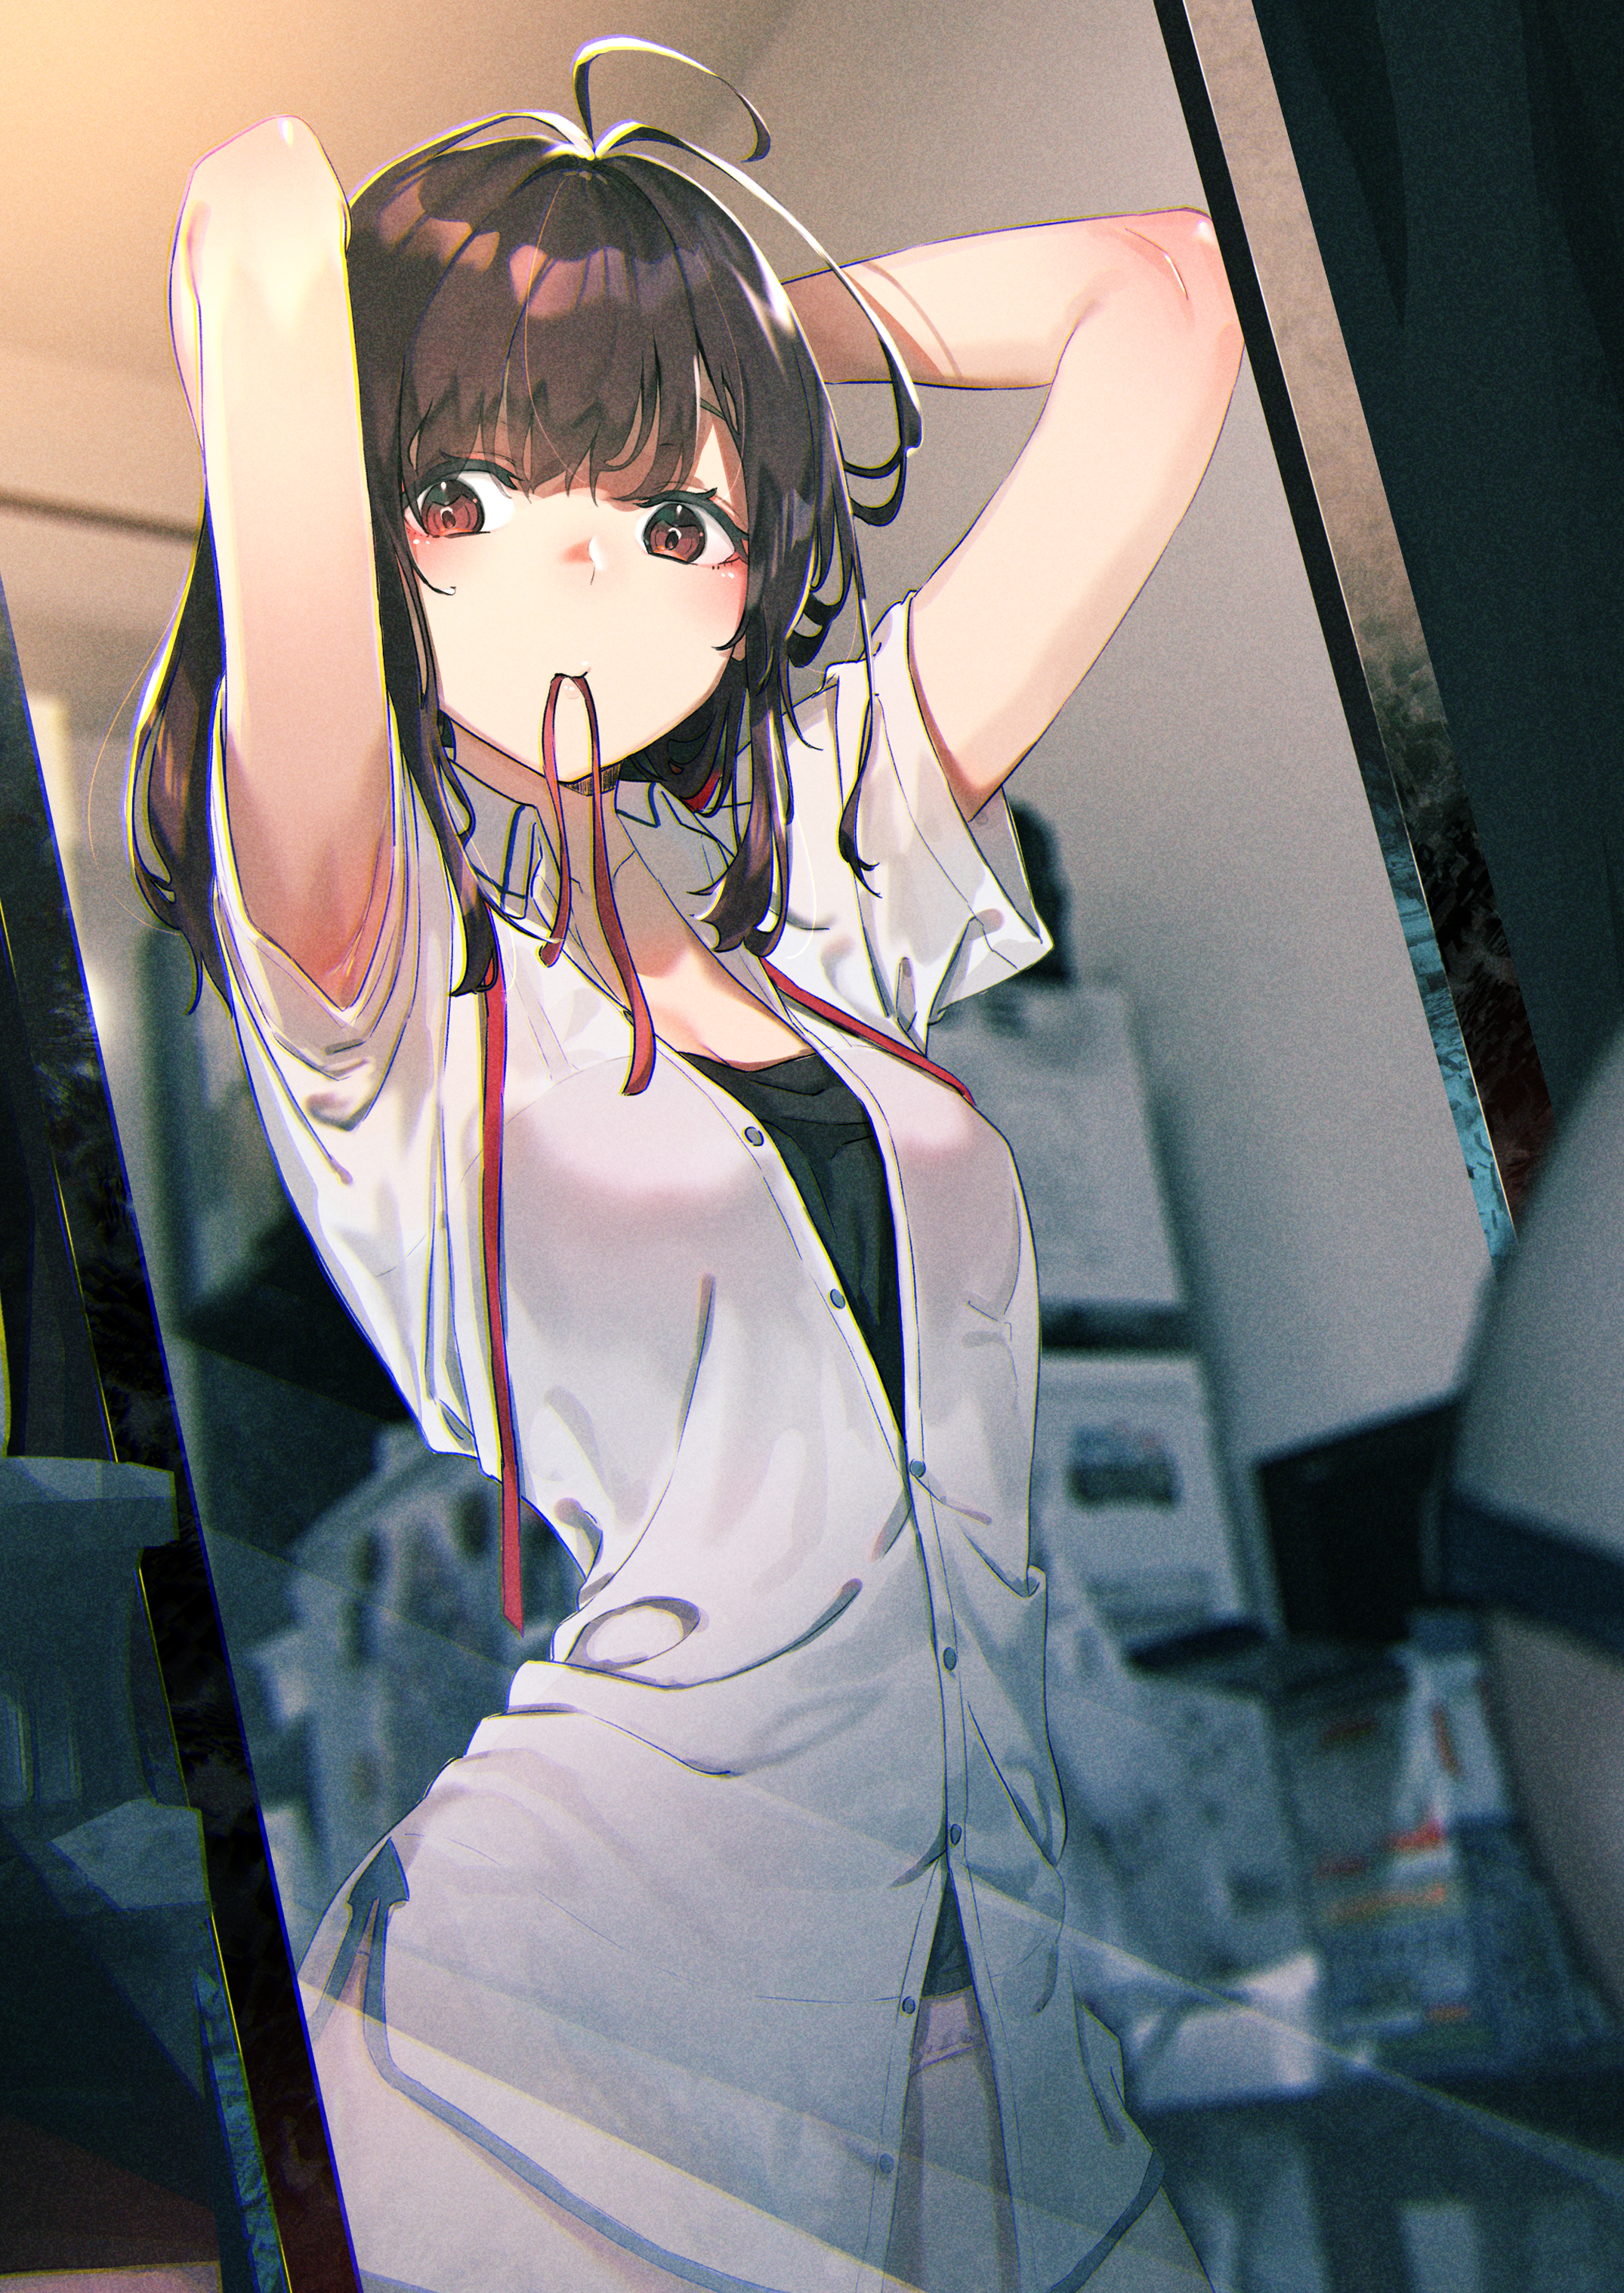 Anime 2150x3035 original characters brunette bangs hands on head ribbon shirt mirror reflection artwork illustration drawing digital art 2D Rolua Noa anime standing arms up arms behind head